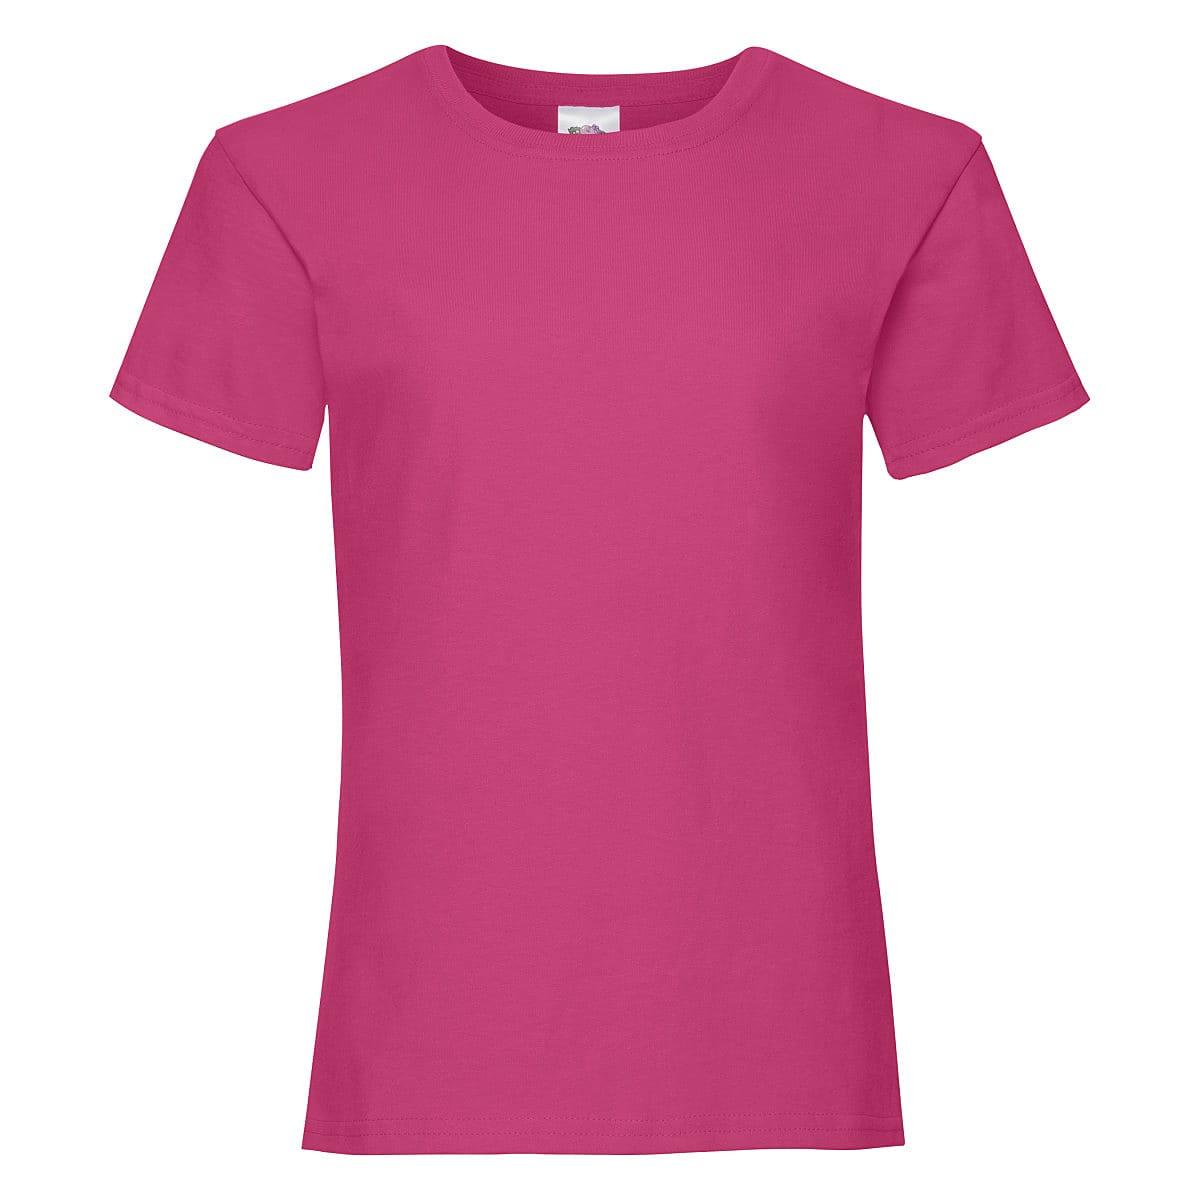 Fruit Of The Loom Girls Valueweight T-Shirt in Fuchsia (Product Code: 61005)